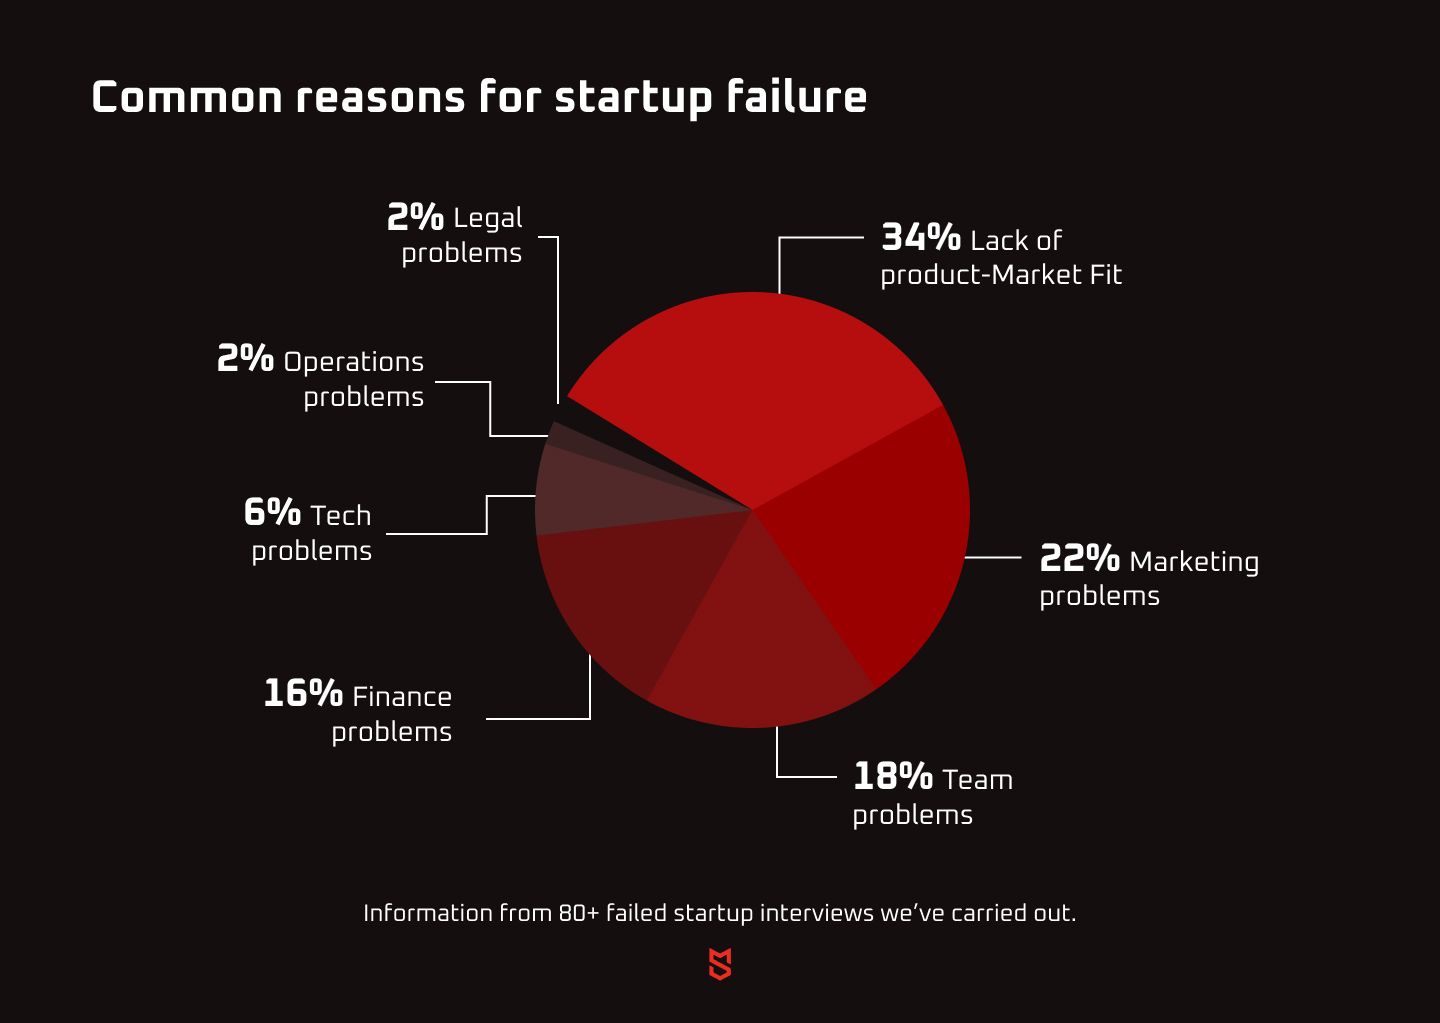 Common reasons to startup failure